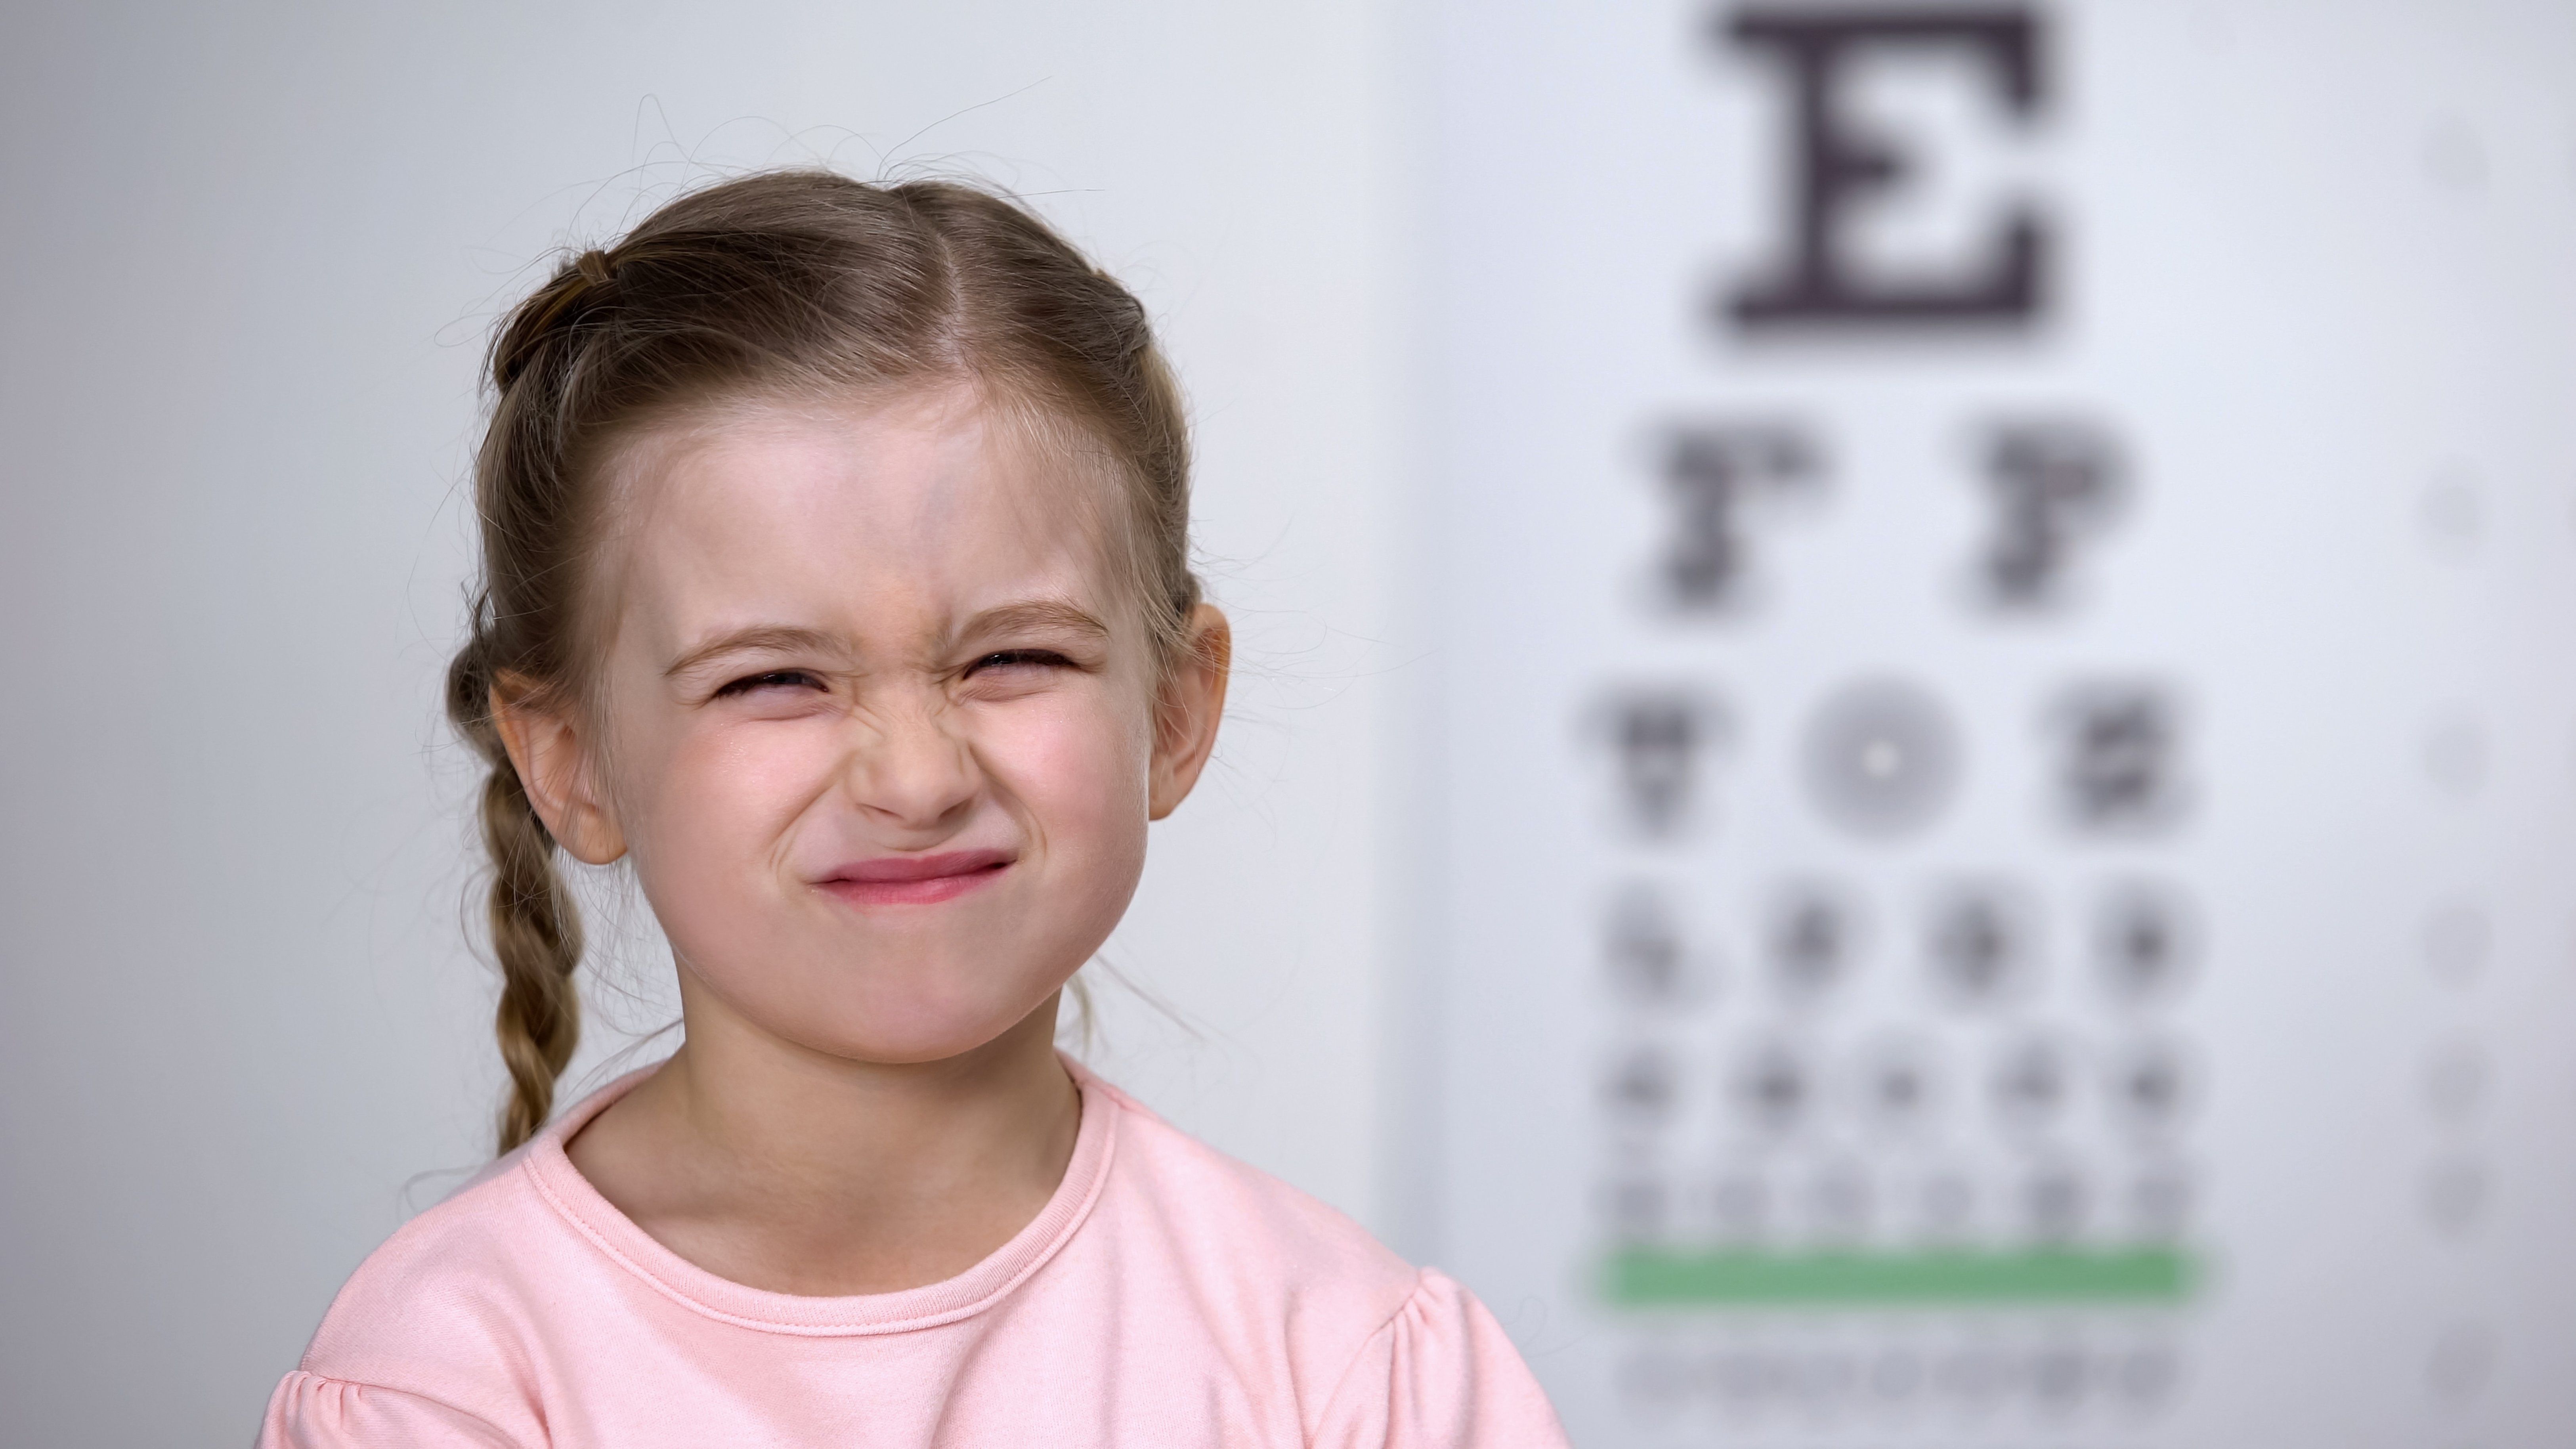 Signs Your Child May Have Myopia